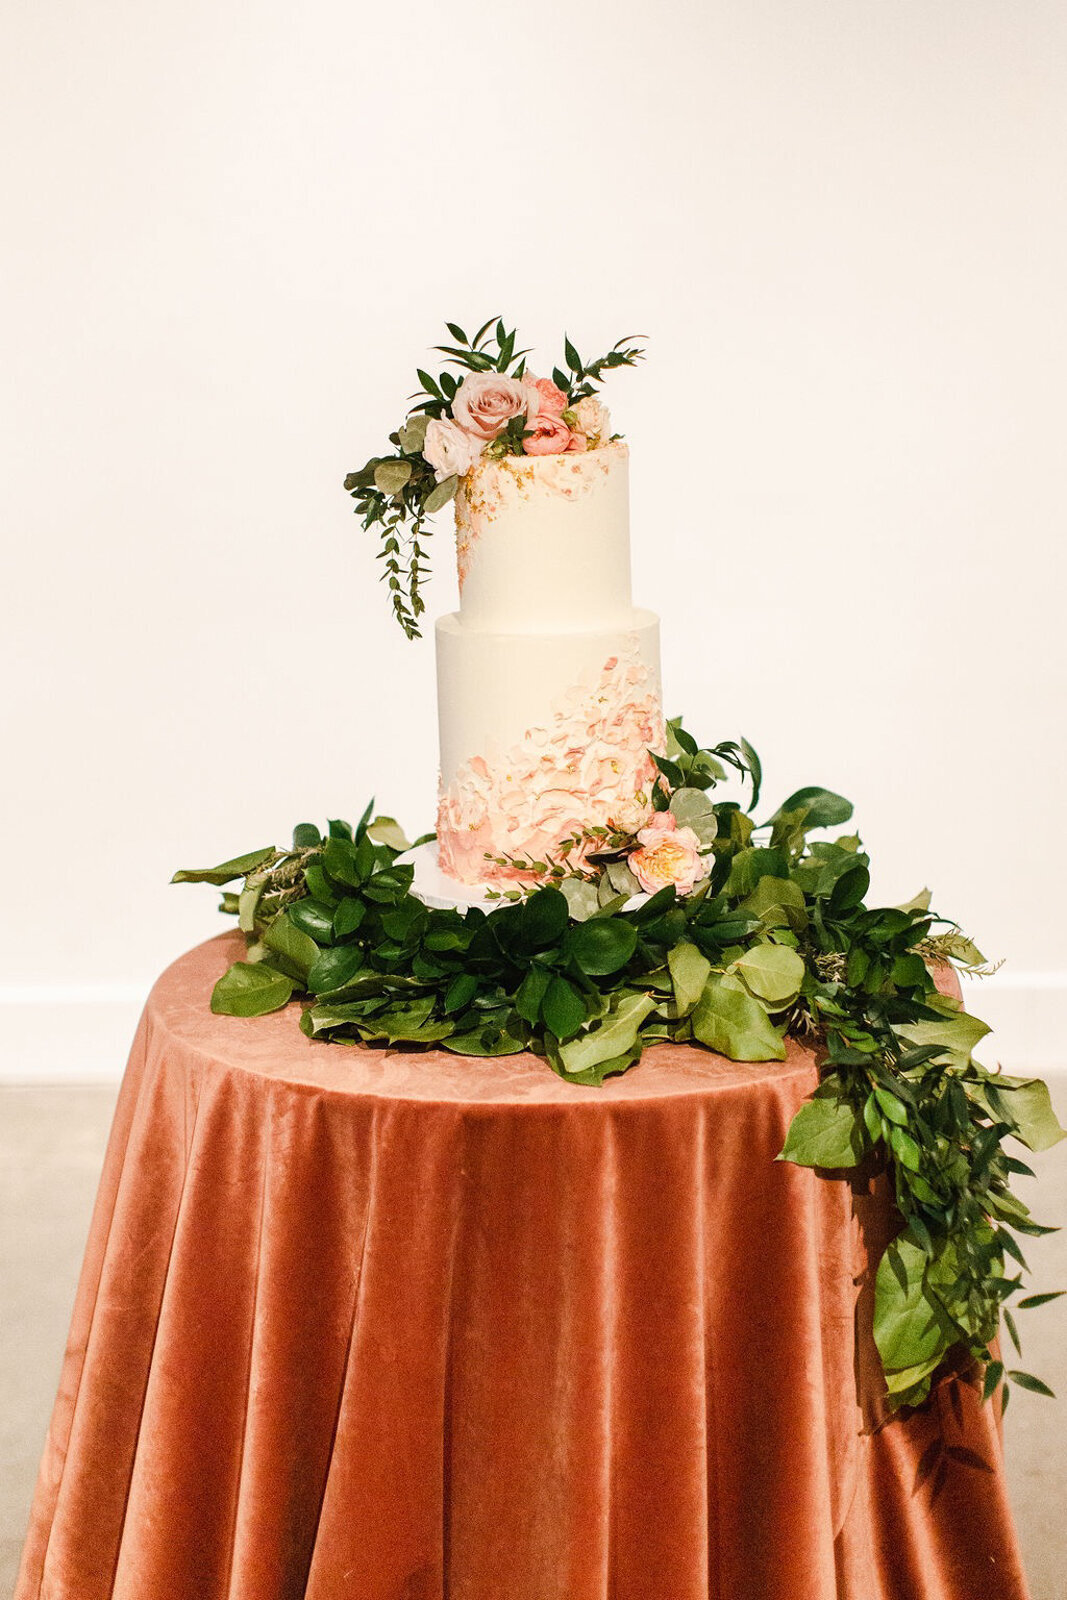 White and peach wedding cake with buttercream textured detail and cascading greenery, created by Bake My Day, contemporary cakes & desserts in Calgary, Alberta, featured on the Brontë Bride Vendor Guide.